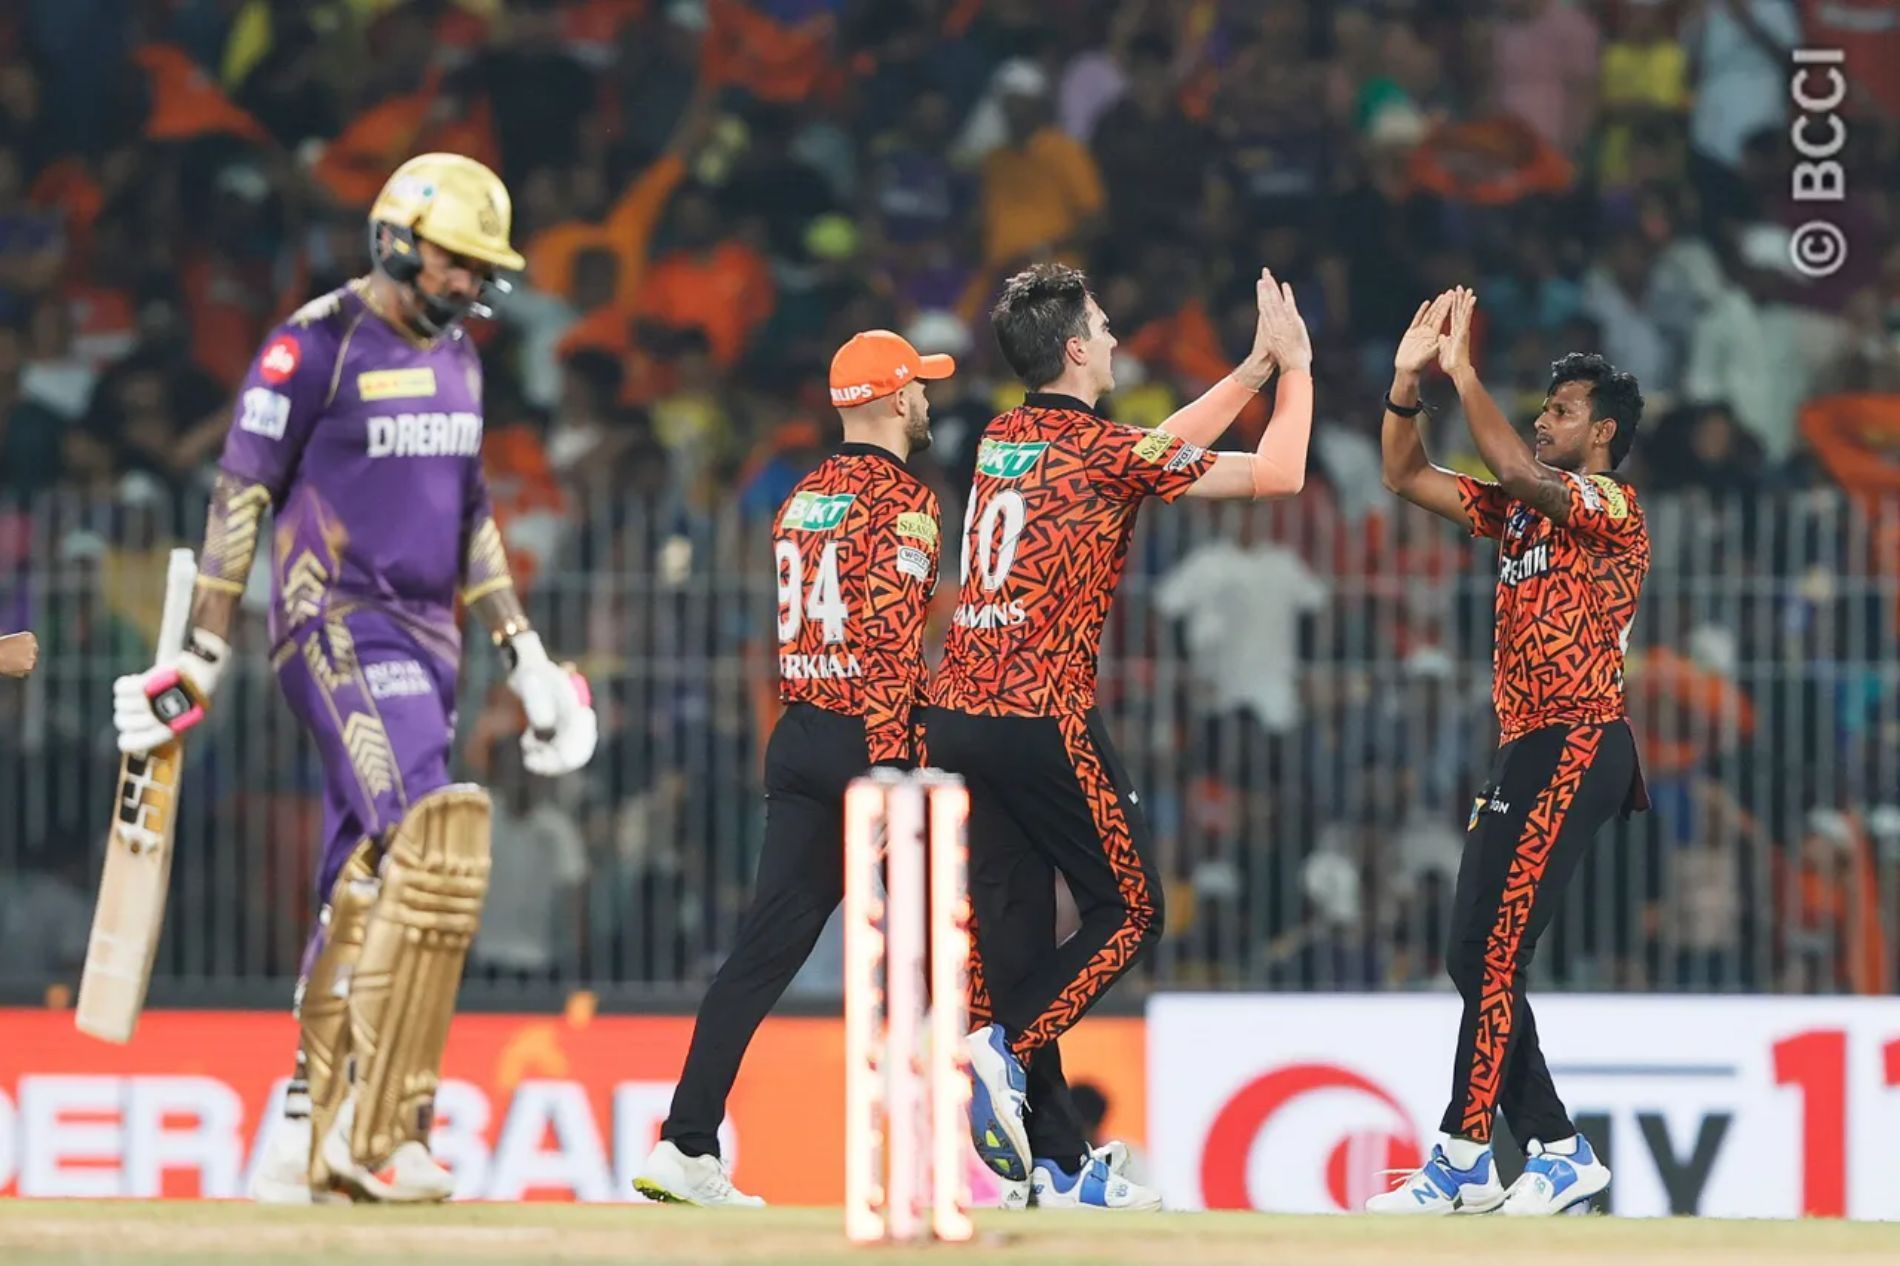 Sunil Narine perished for 6 in KKR&rsquo;s chase. (Image Credit: BCCI/ iplt20.com)